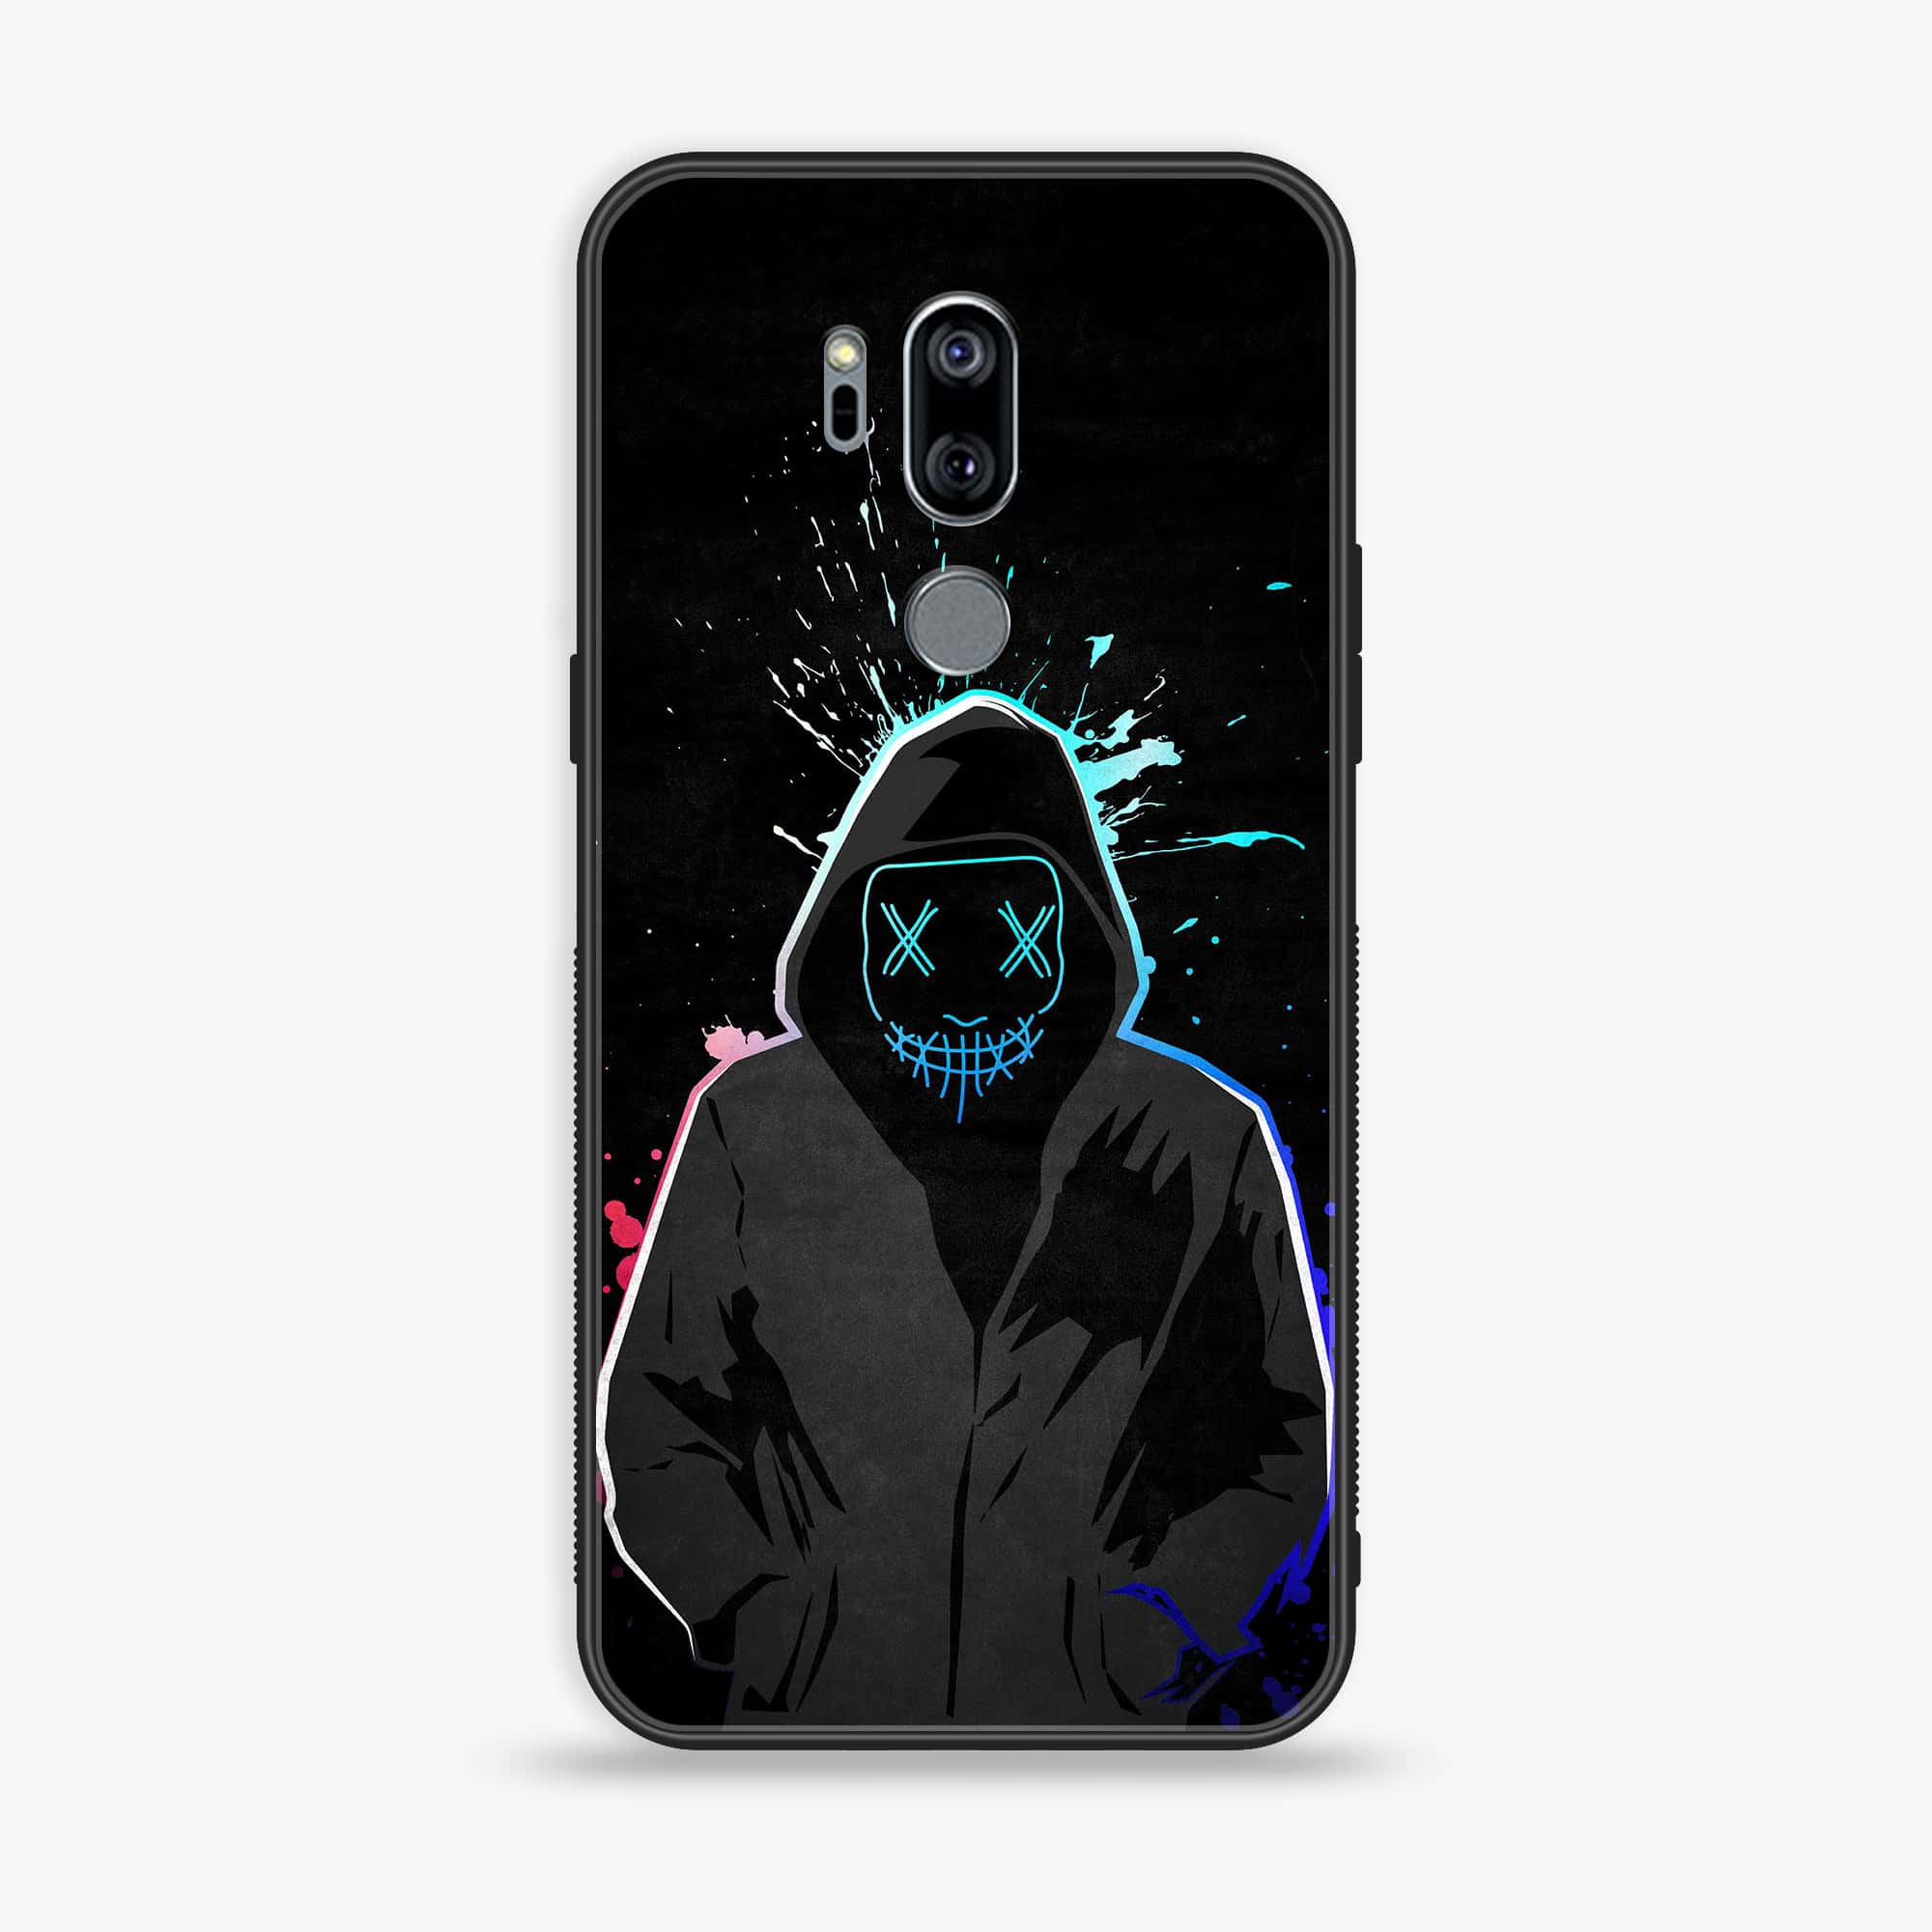 LG G7 ThinQ - Anonymous 2.0 Series - Premium Printed Glass soft Bumper shock Proof Case